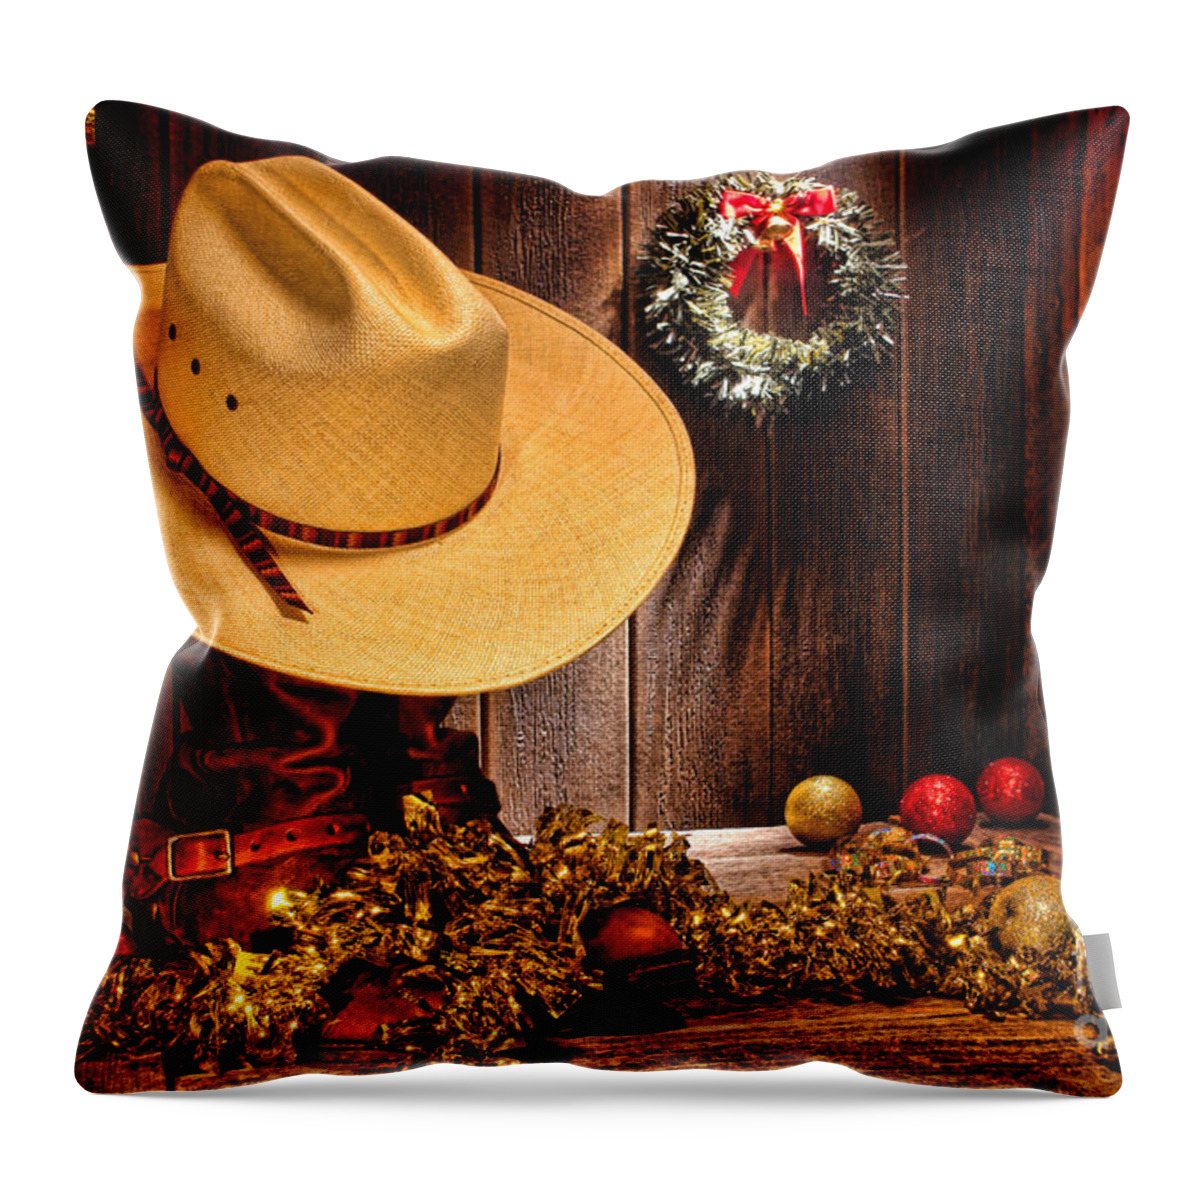 Christmas Throw Pillow featuring the photograph Cowboy Christmas Party by Olivier Le Queinec